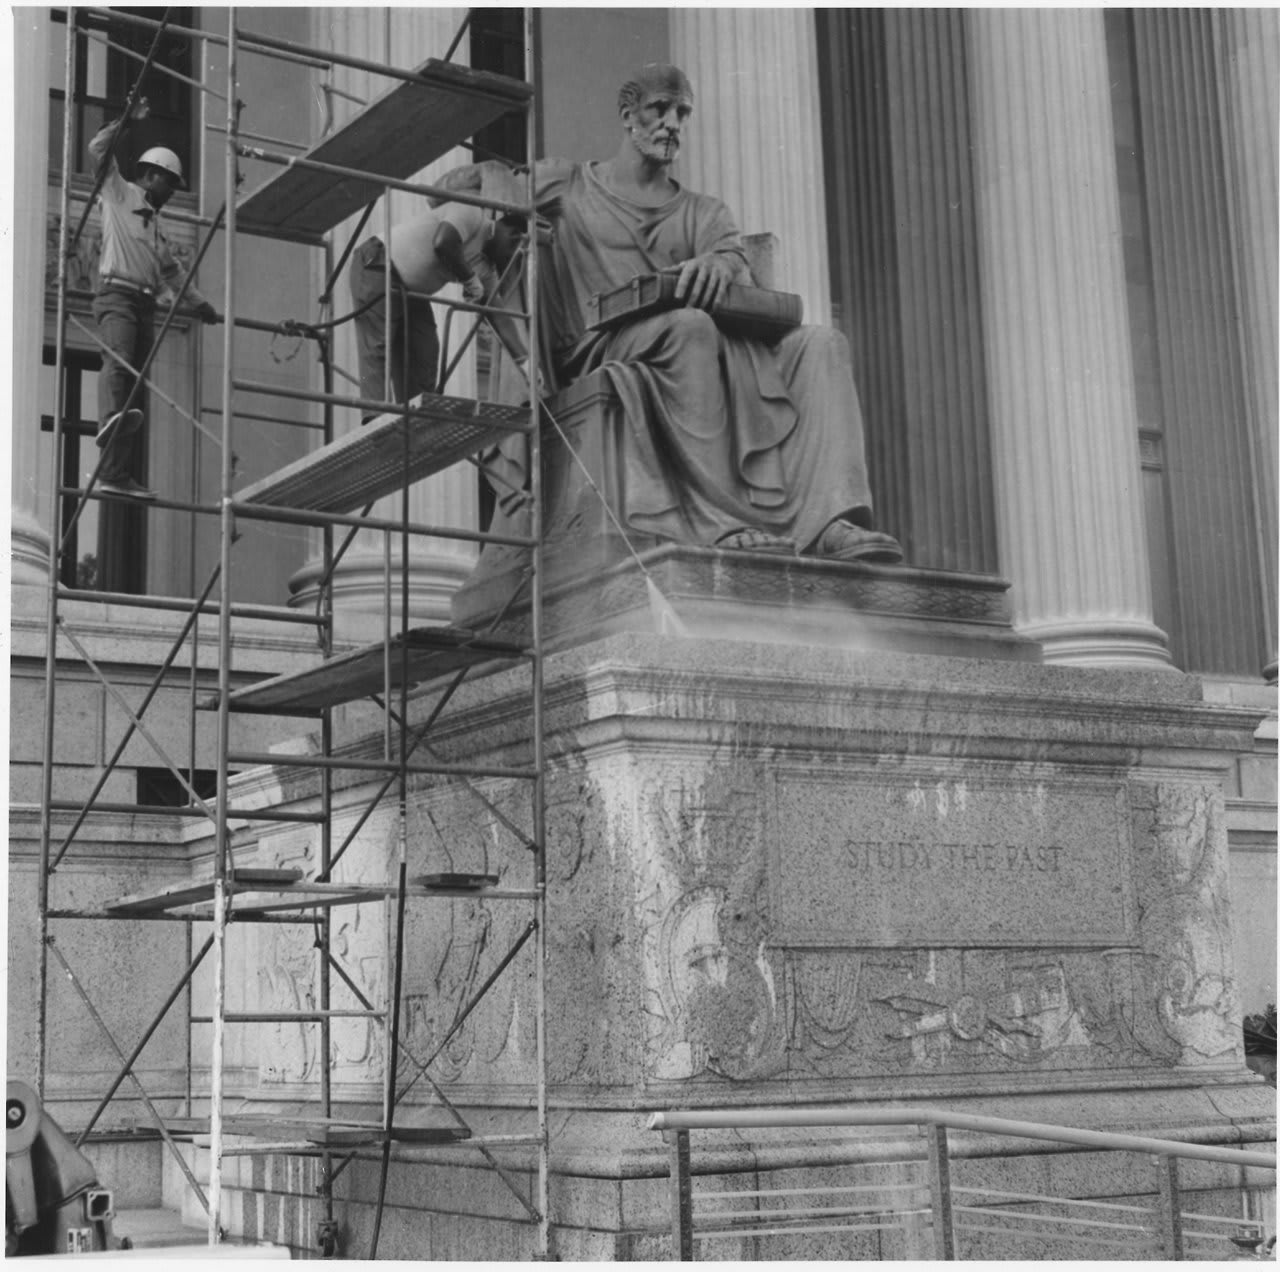 Cleaning the statue "Study the Past" in front of @USNatArchives 45 years ago OTD 1972: